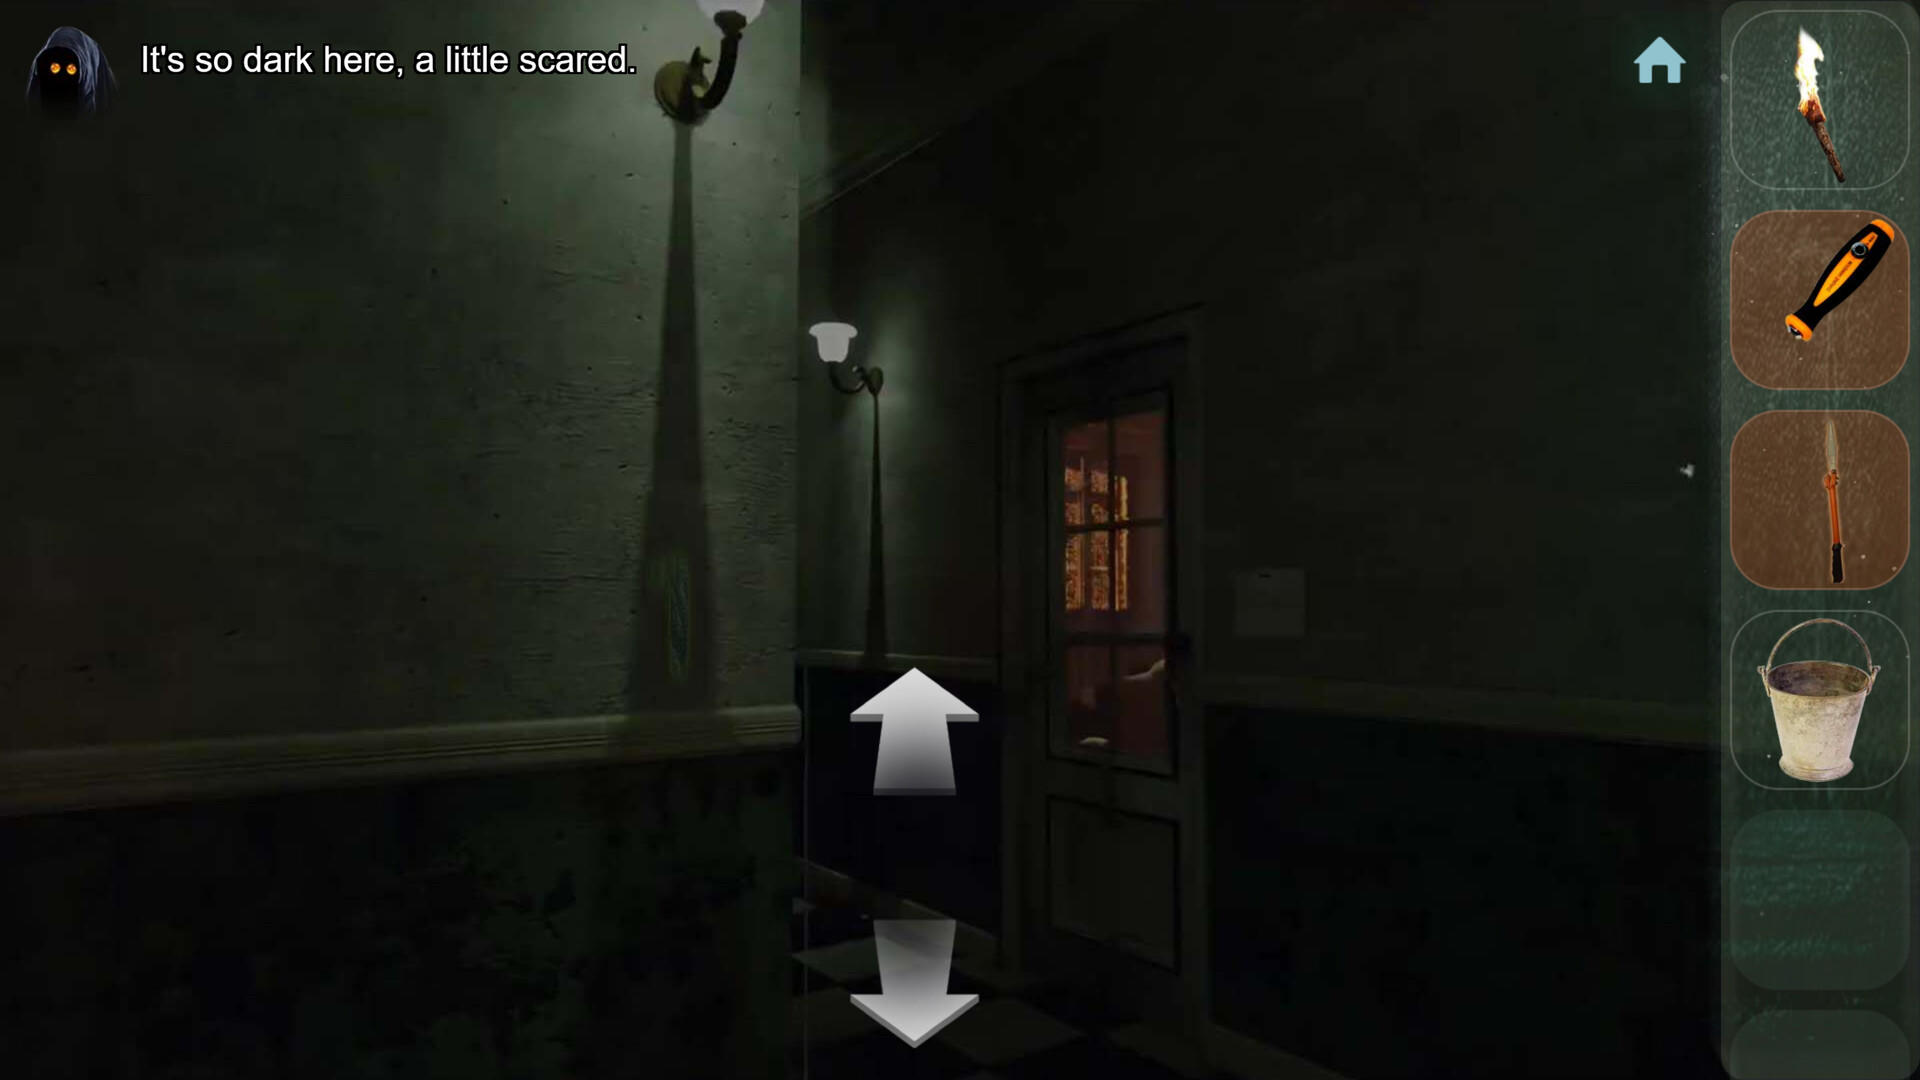 Screenshot 1 of Escape Room Collection C2 Psychological Horror 